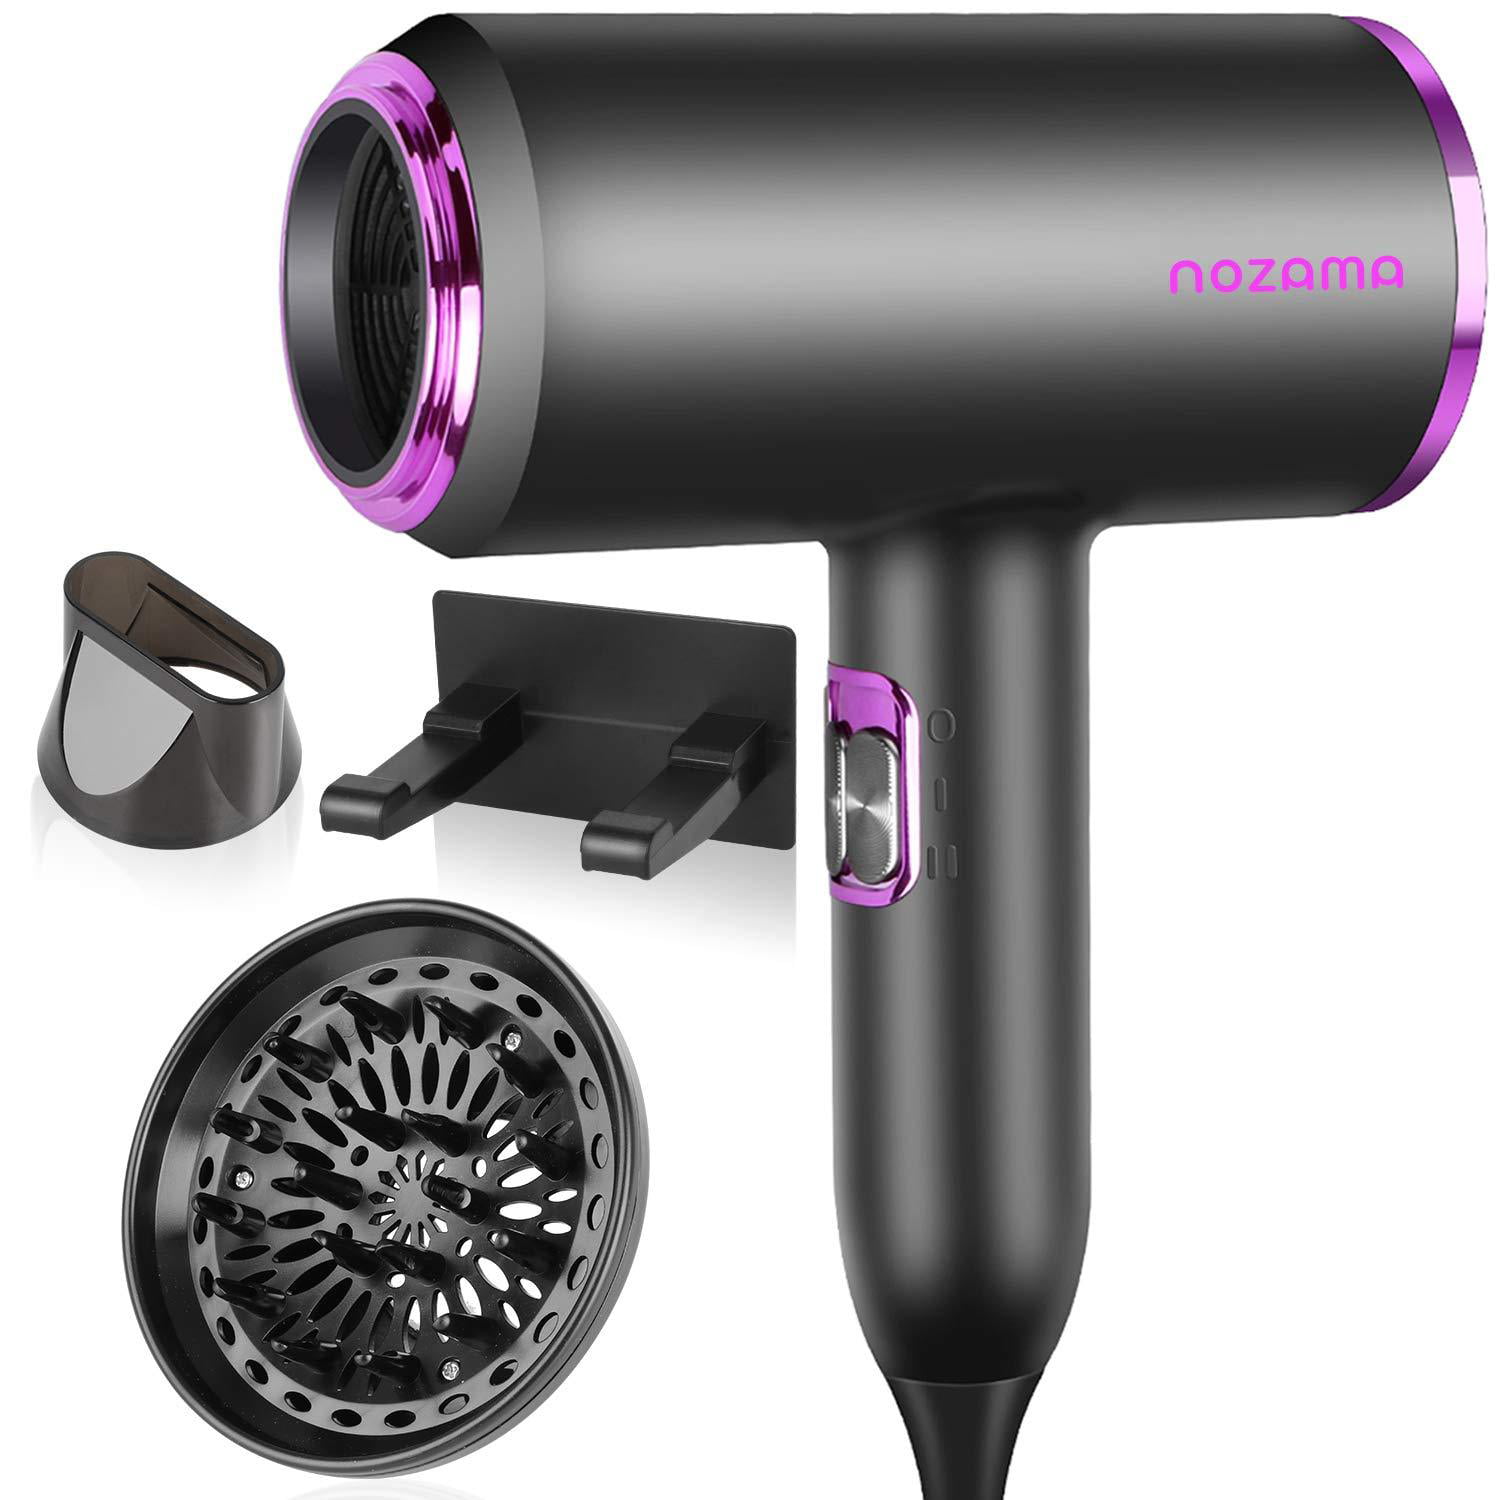 Ionic Hair Dryer, Nozama 1800W Professional Hair Blow Dryers with 3 Heat  Settings, 2 Speed, 3 Cool Settings,2 Concentrator Nozzles, Fast Drying Blow  Dryer for Home, Travel, Salon and Hotel - Walmart.com